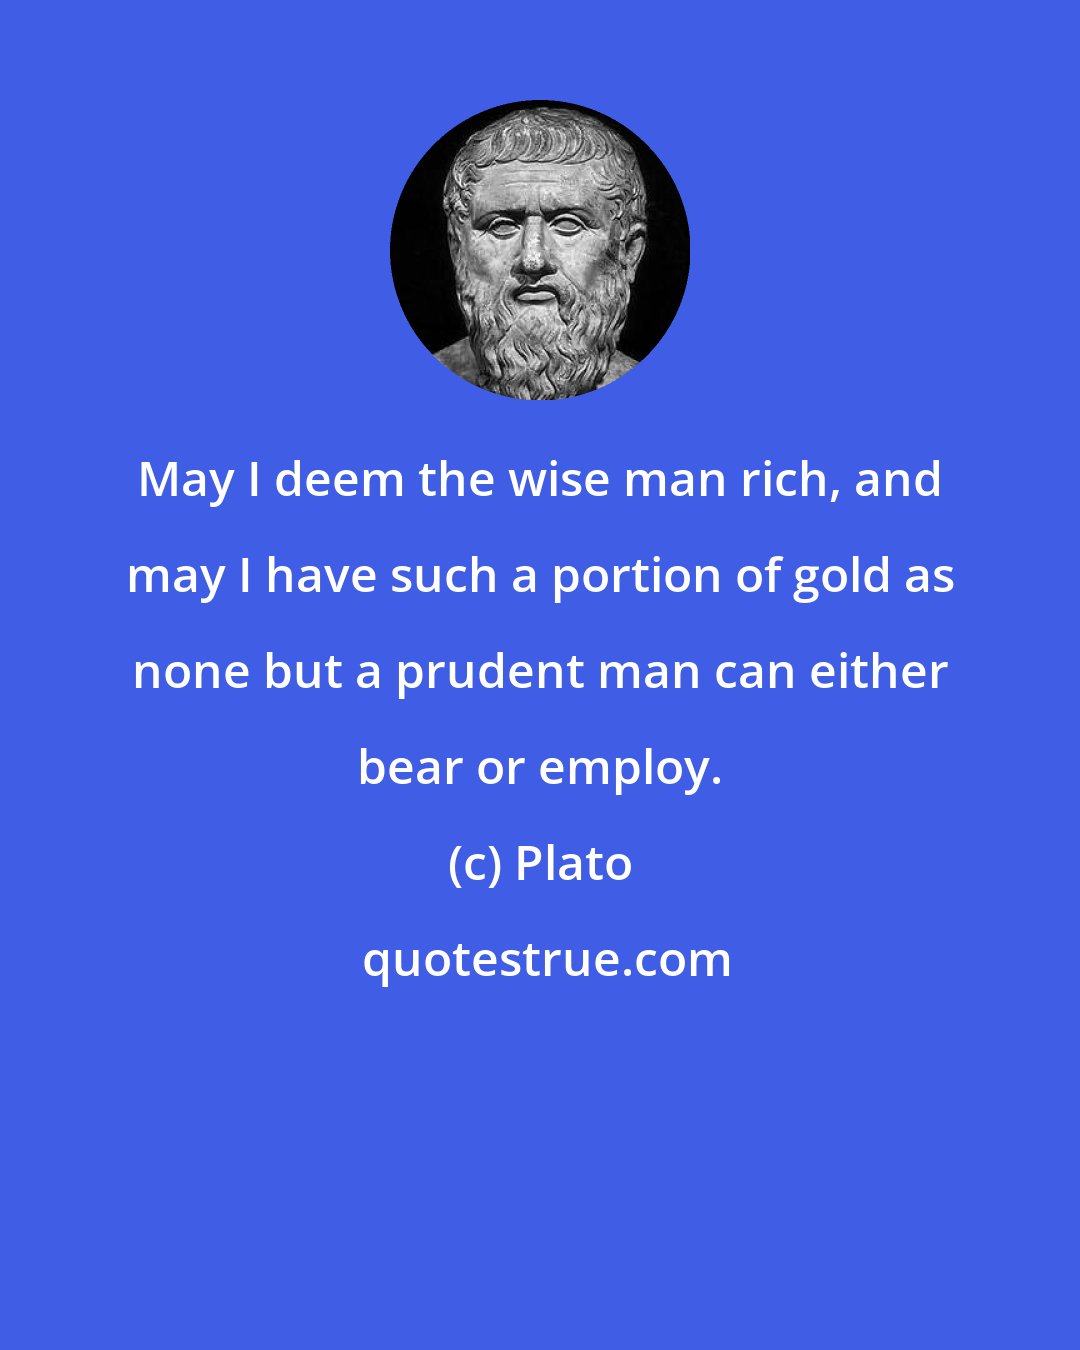 Plato: May I deem the wise man rich, and may I have such a portion of gold as none but a prudent man can either bear or employ.